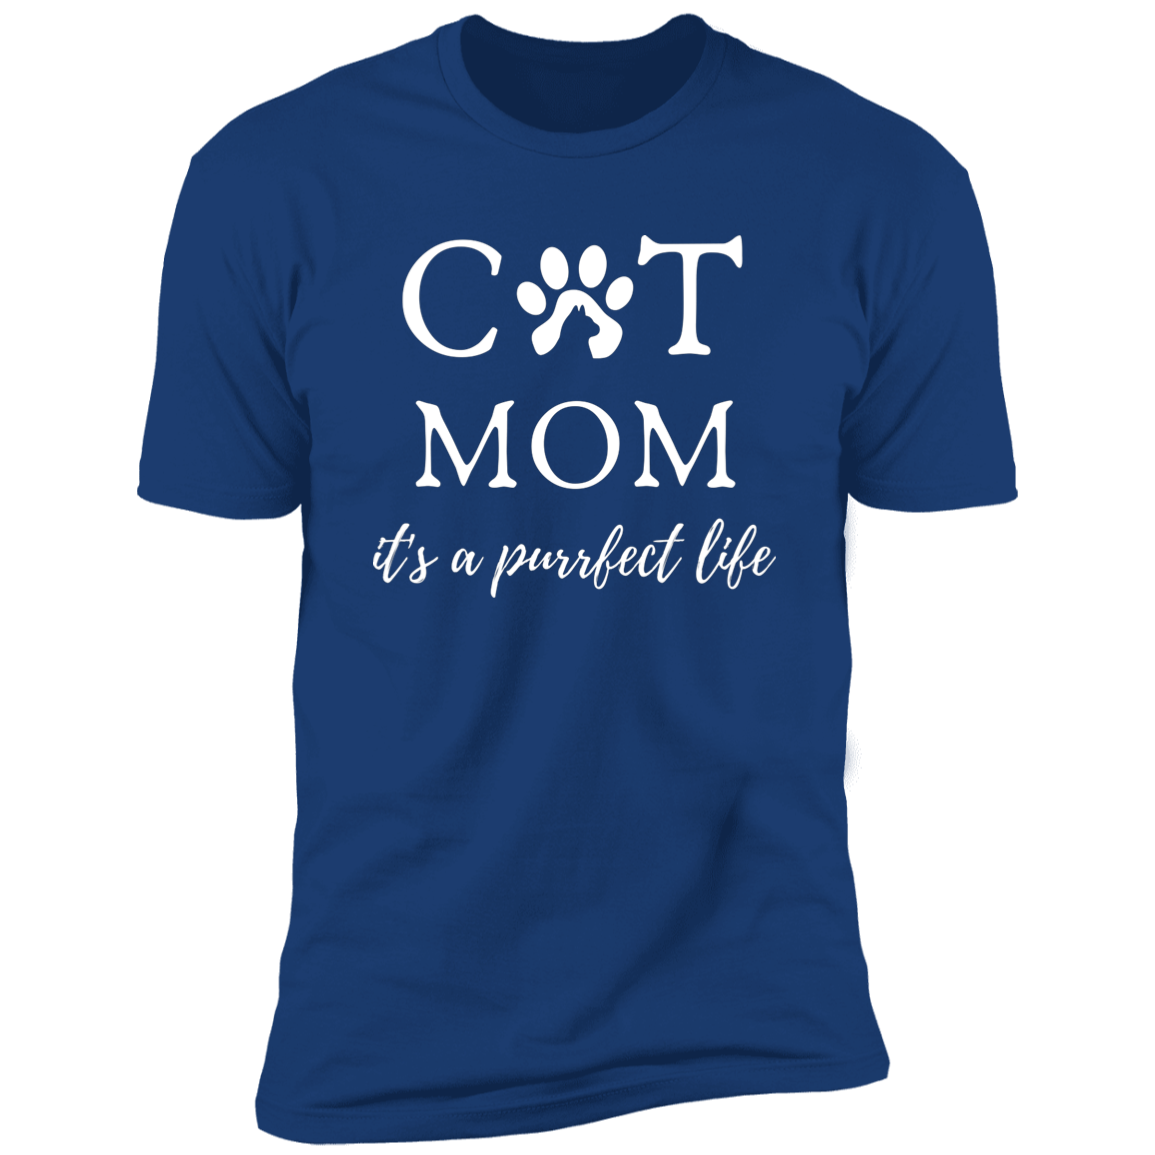 Cat Mom It's a Purrfect Life T-shirt, Cat Mom Shirt for humans, in royal blue